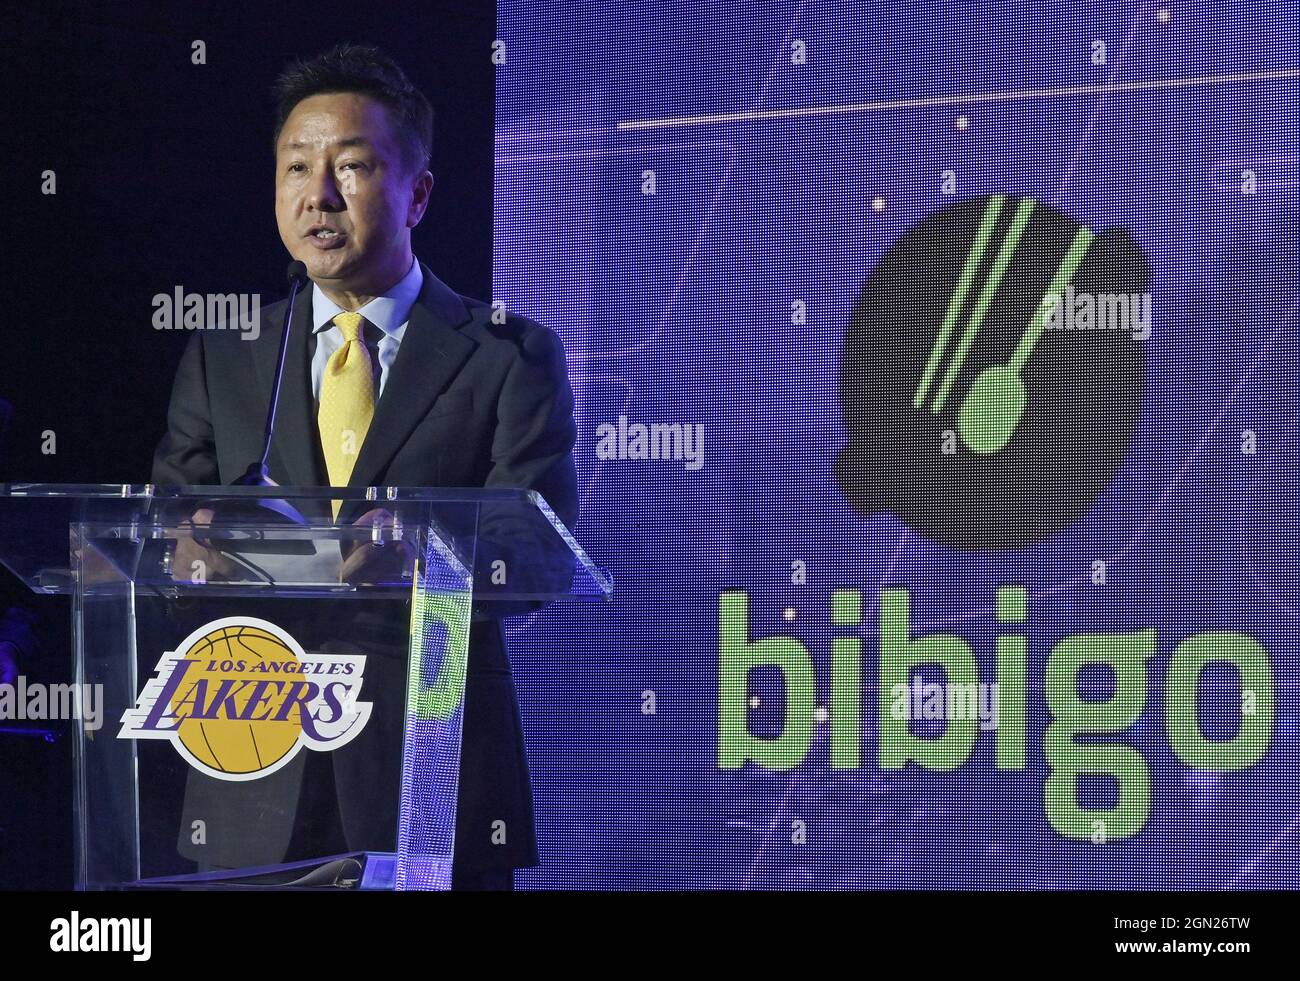 Wookho Kyeong, CMO of CJ CheilJedang speaks during the Los Angeles Lakers kick-off event to announce a new global marketing partnership with Bibigo, a popular South Korean food company at the UCLA Health Training Center in El Segundo, California on Monday, September 20, 2021. Ahead of the 2017-18 NBA season, the NBA put into action its patch program that allowed NBA teams to rent out a small square (2.5 inches by 2.5 inches) on the left shoulder of their jerseys to outside companies. The Lakers' $100 million partnership with Bibigo is now the largest jersey patch deal in the NBA. It's also the Stock Photo